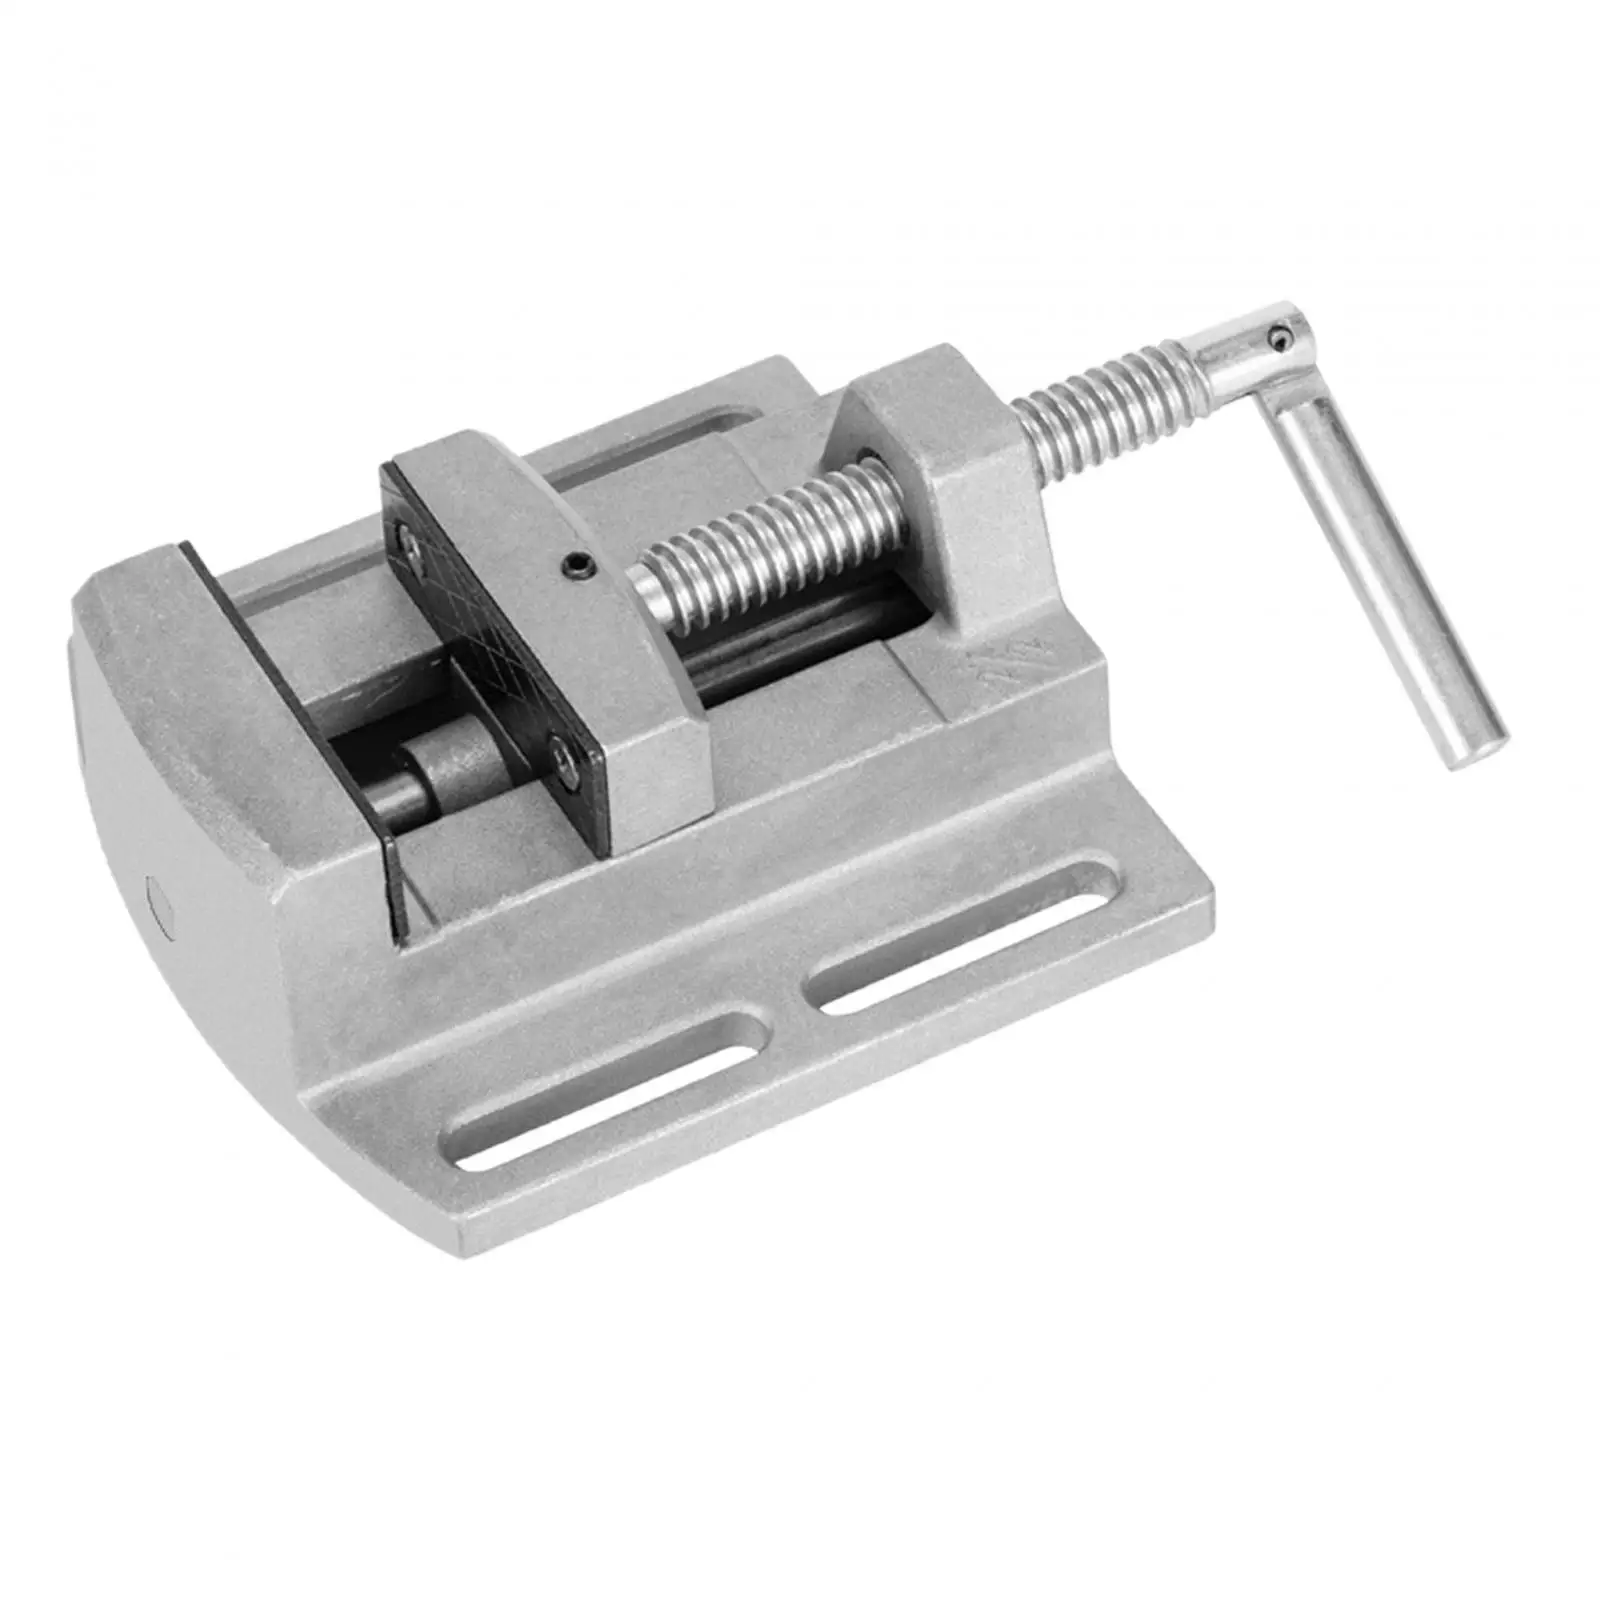 Drill Press Vise Model Heavy Duty Model Making Vise Carving Tool Table Tool Vise Woodworking Craft DIY Mini Parallel Table Vise